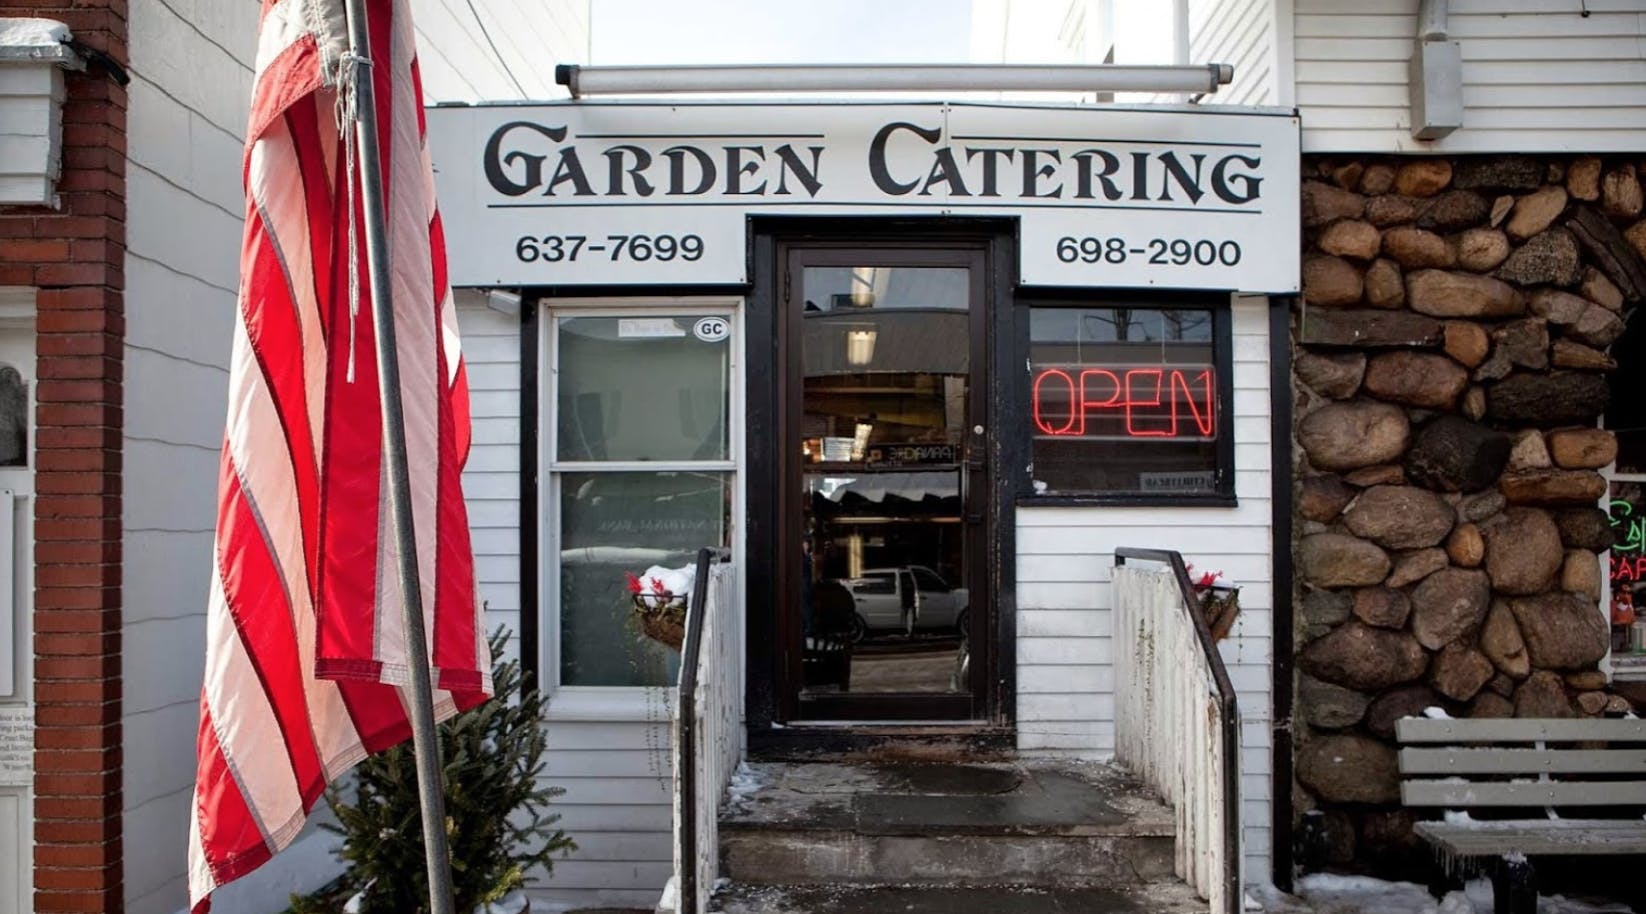 Hamilton Ave Hours Location Garden Catering The Best Nuggets You Ll Ever Have Locations In Ct Ny